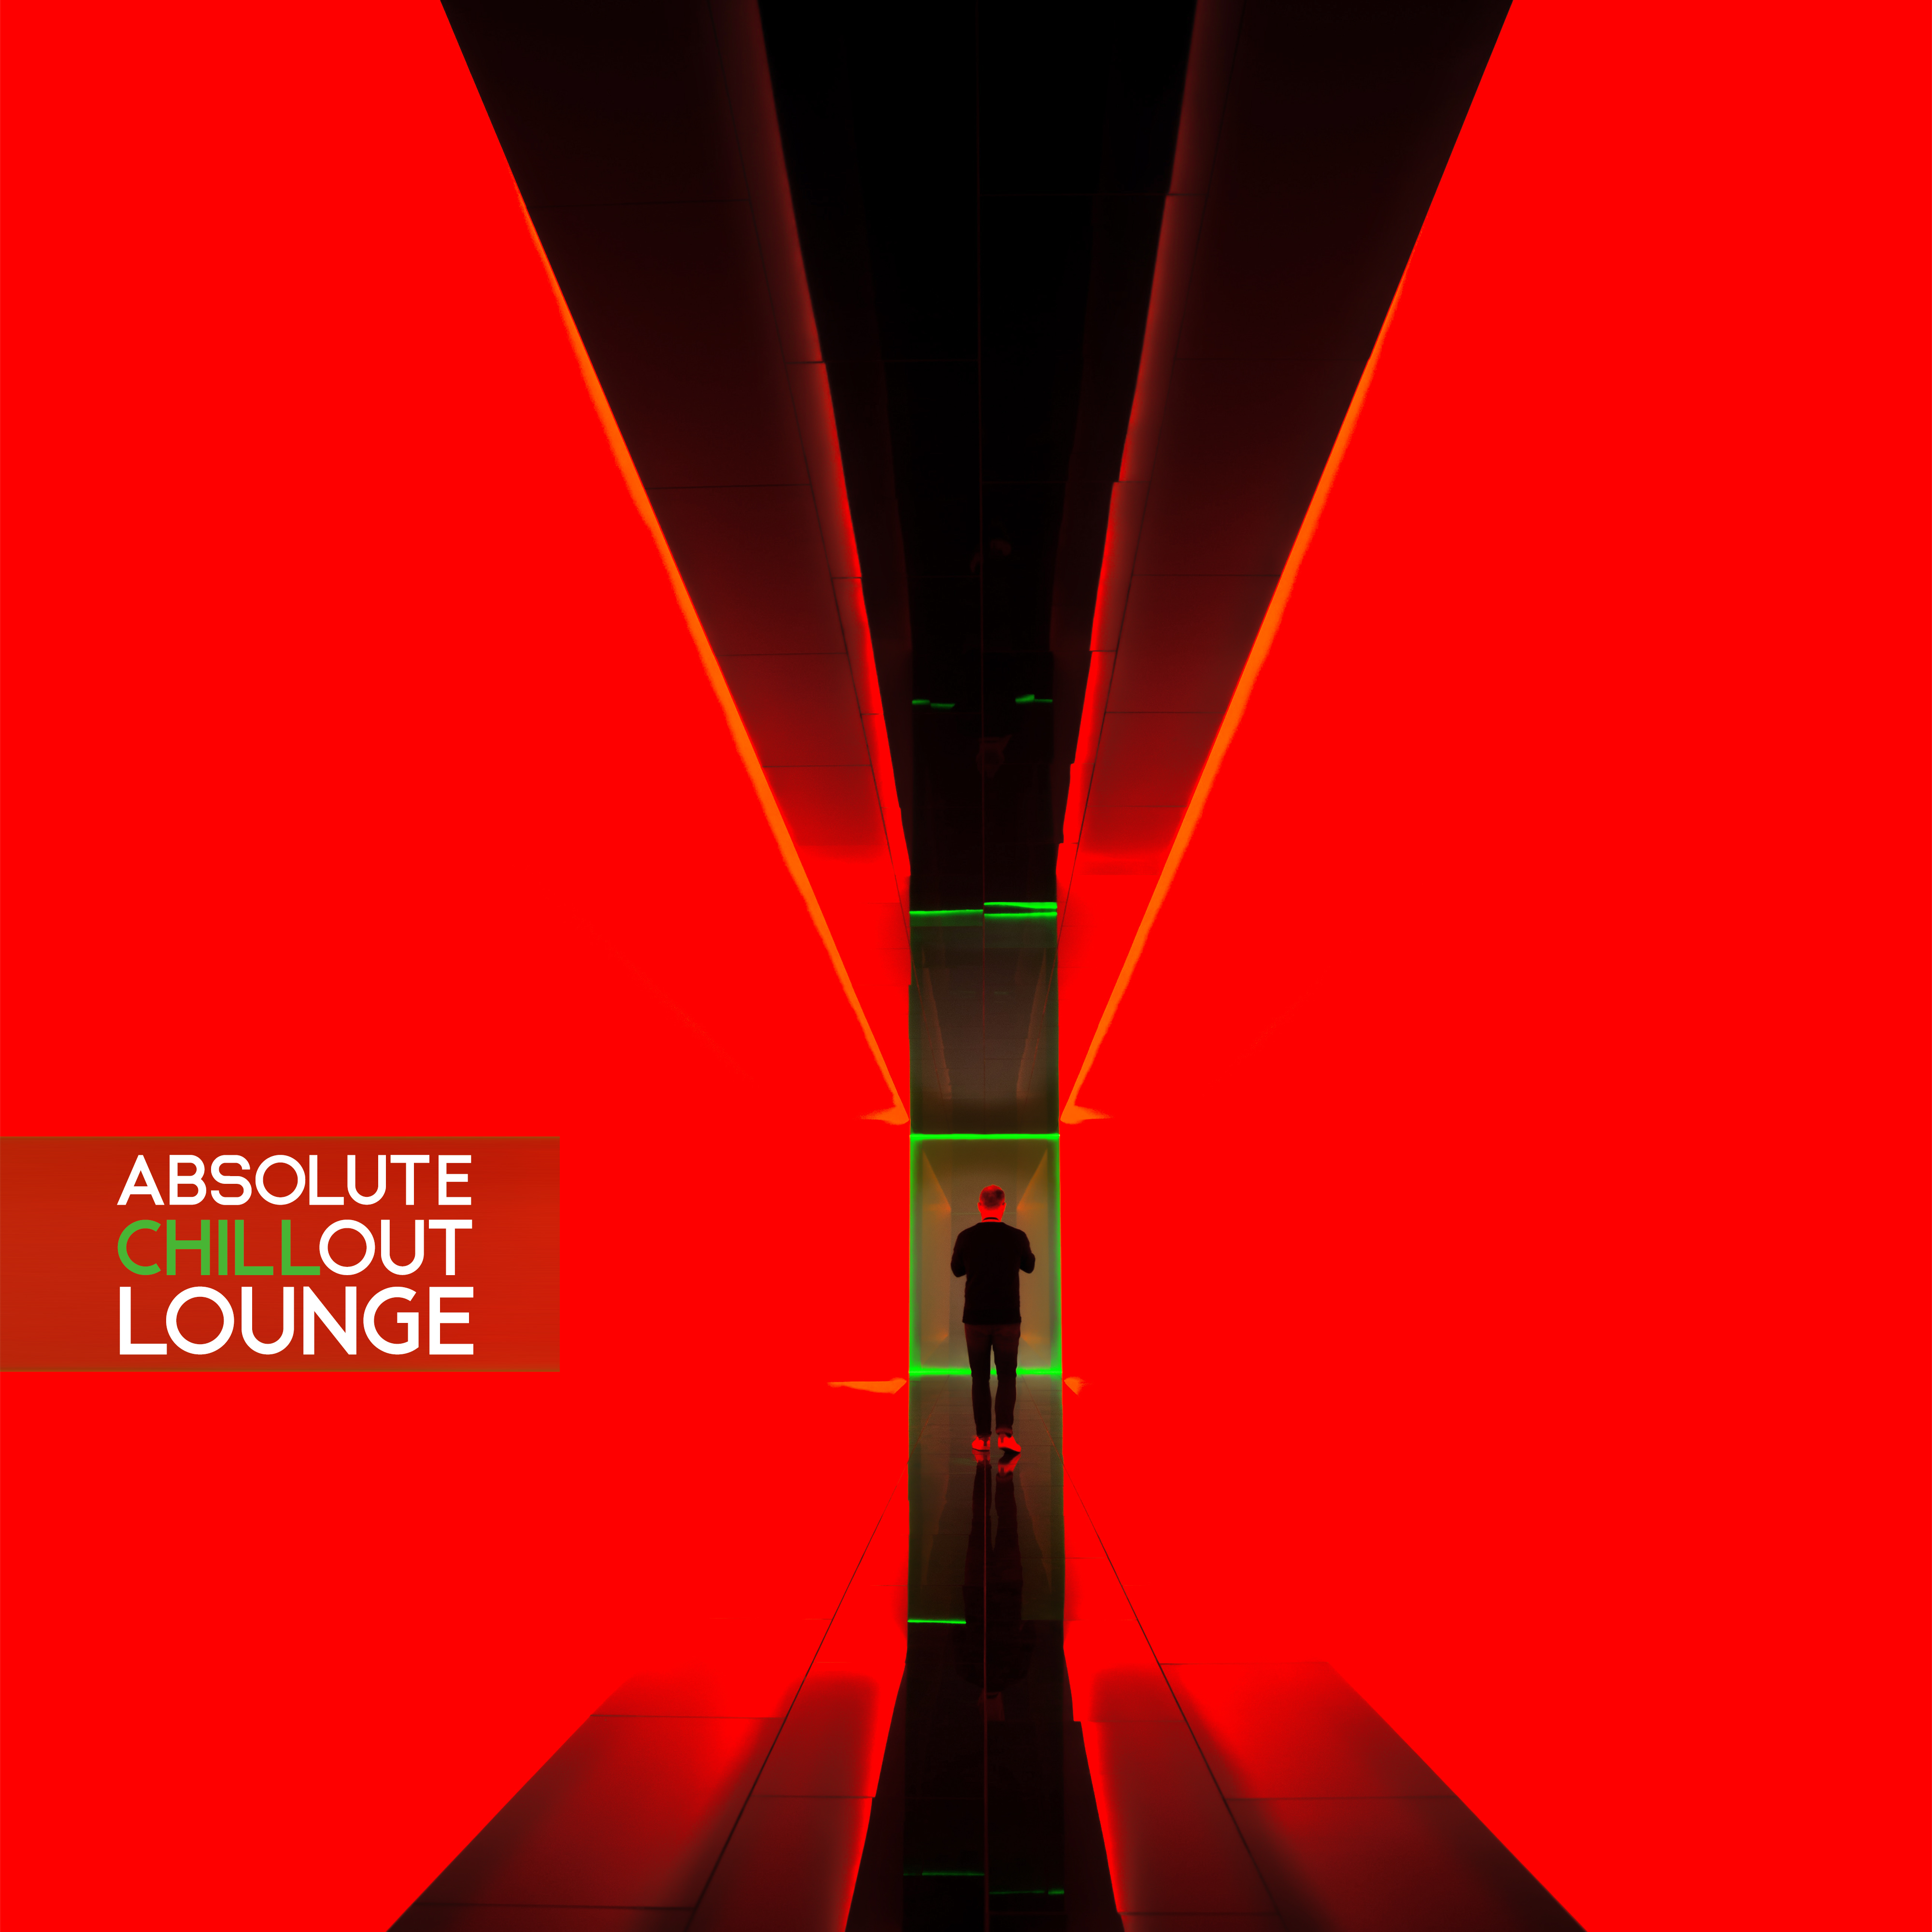 Absolute Chillout Lounge